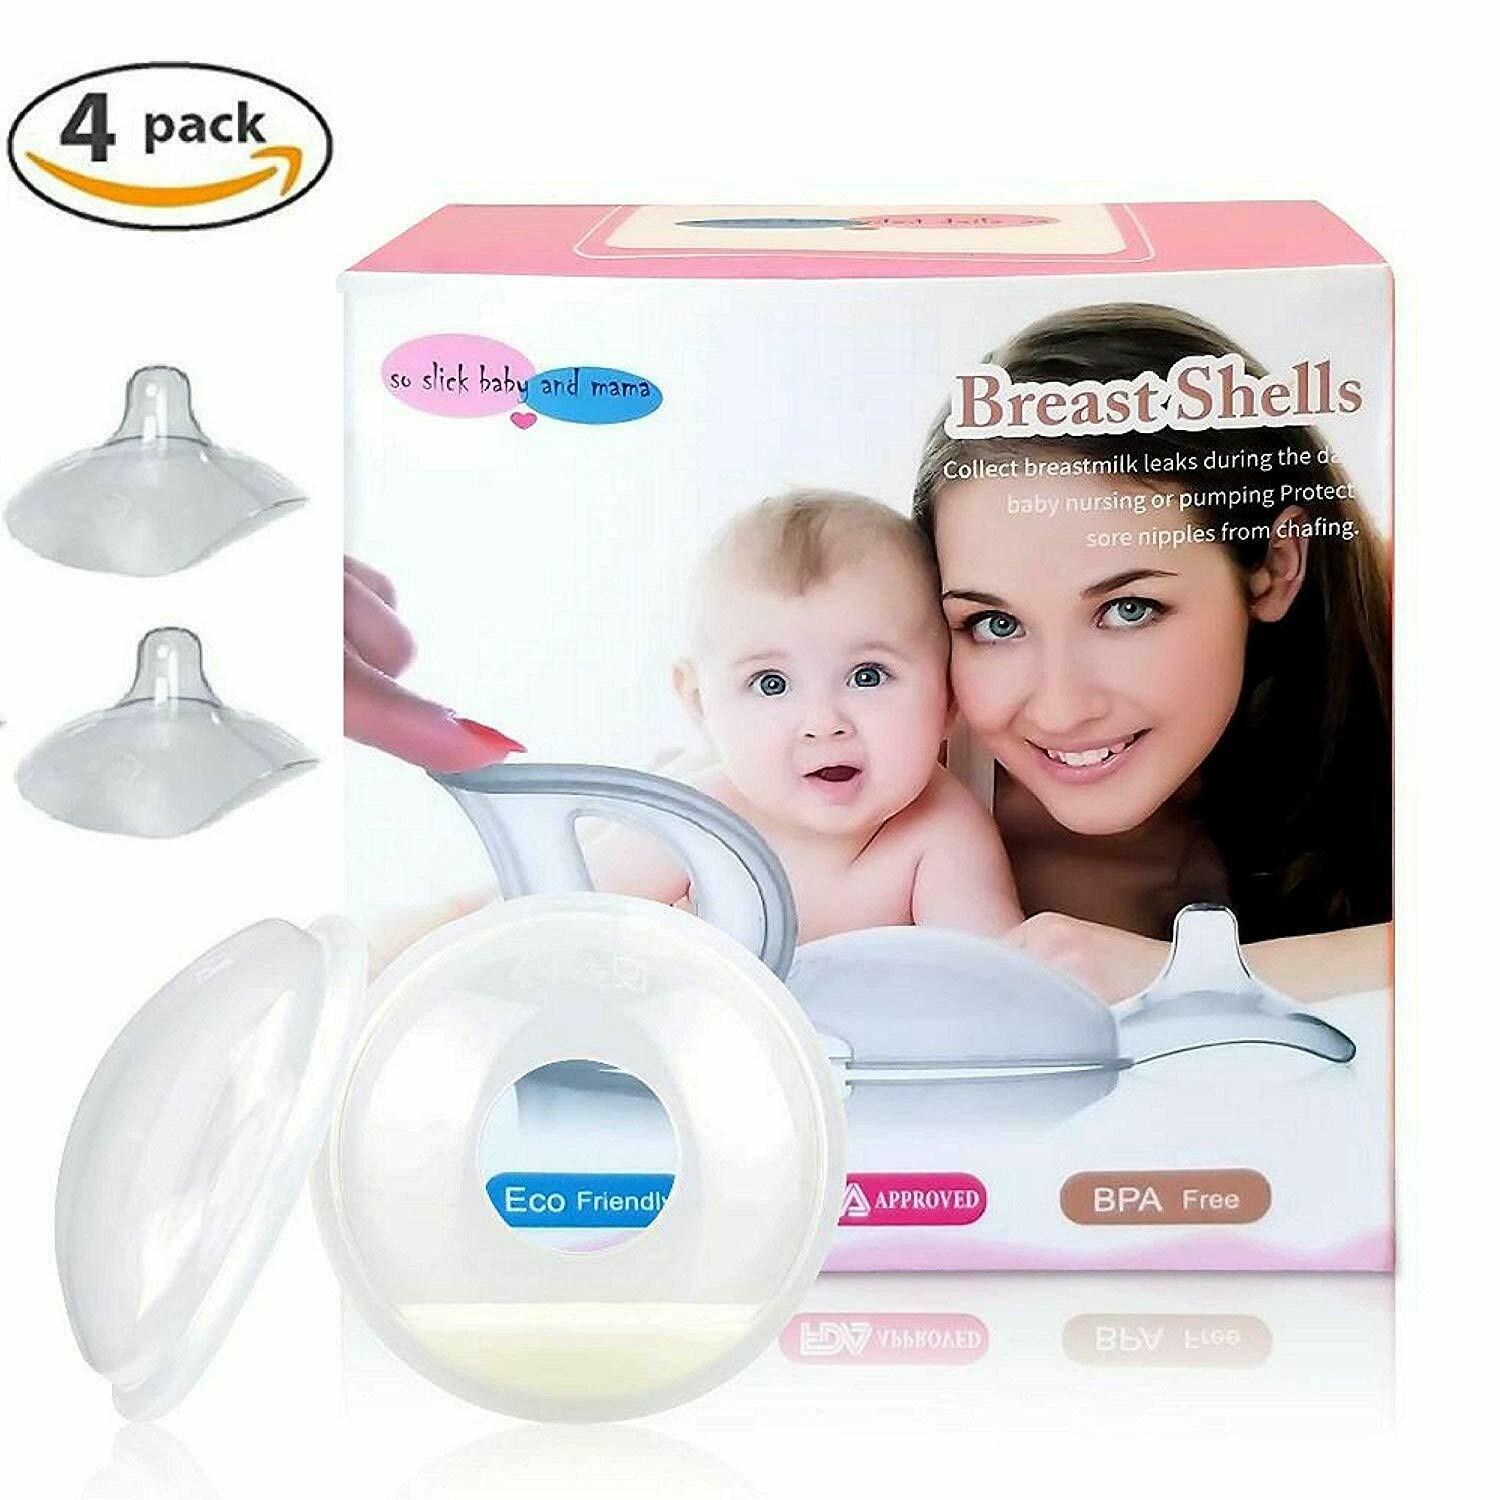 2 Nippleshield With 2 Breast Shell- {pack Of 4} Nipple Shield And Milk Catcher